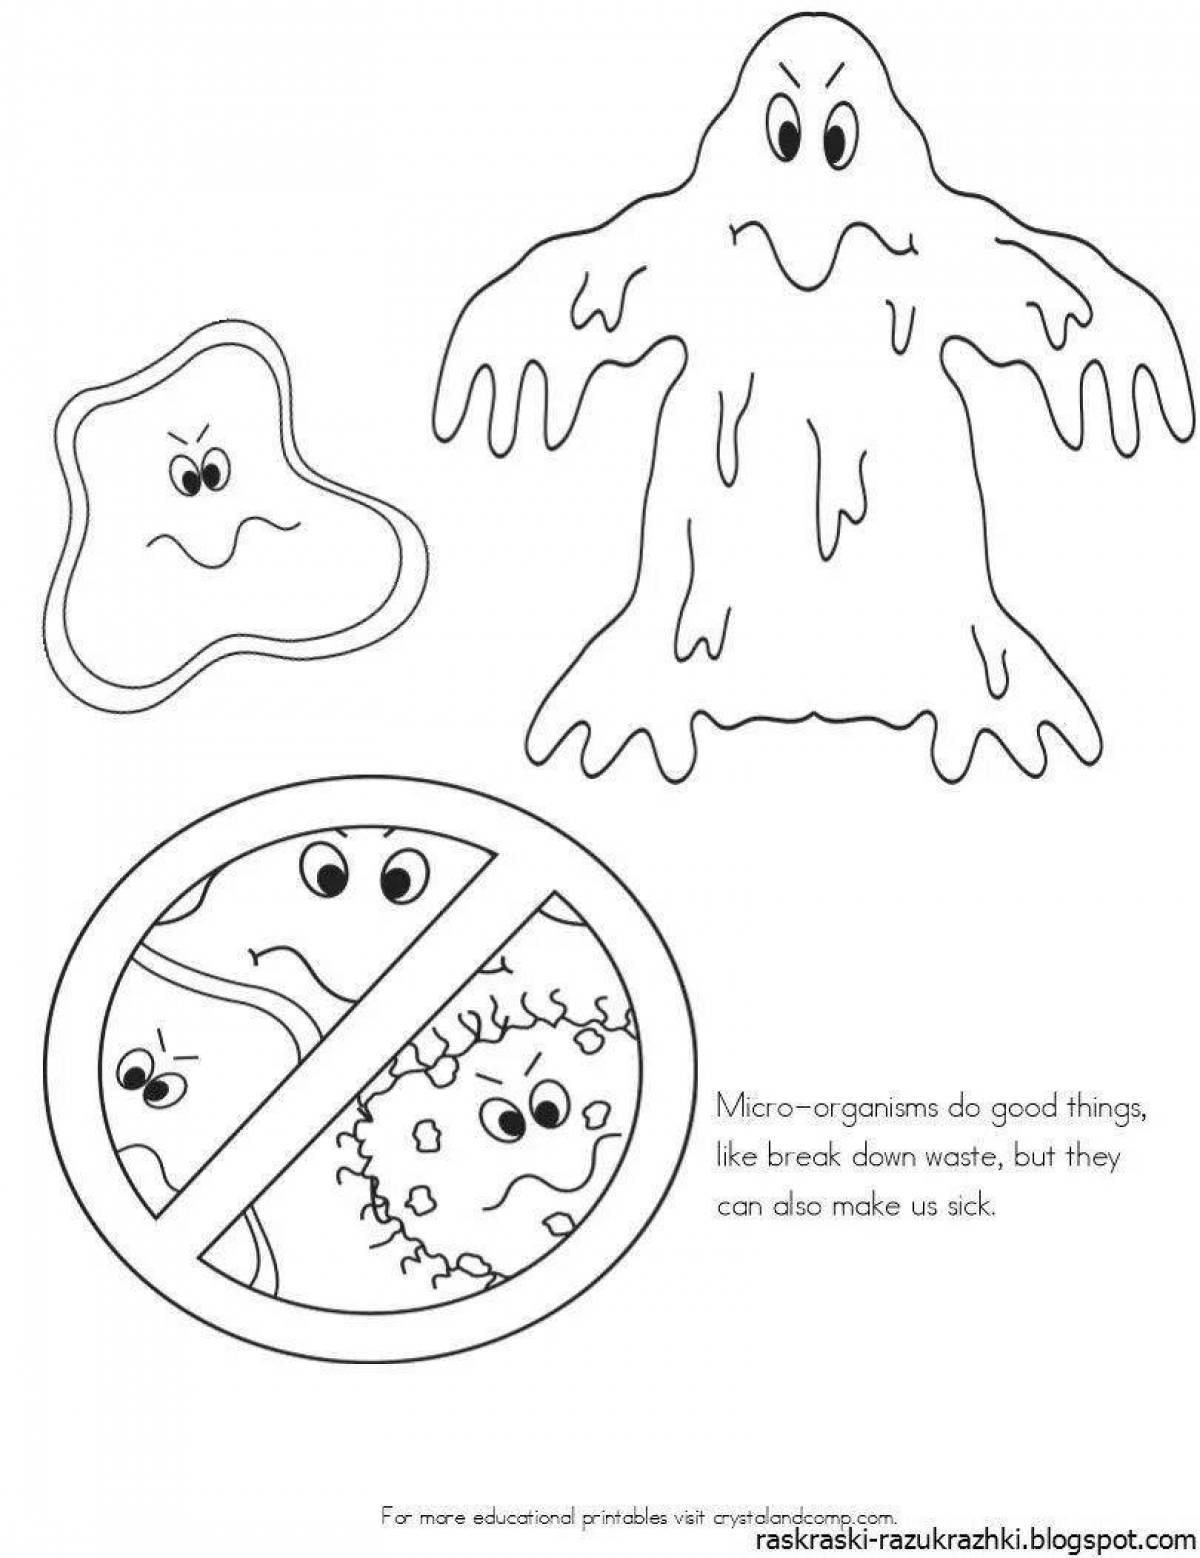 Colouring bright microbes and bacteria